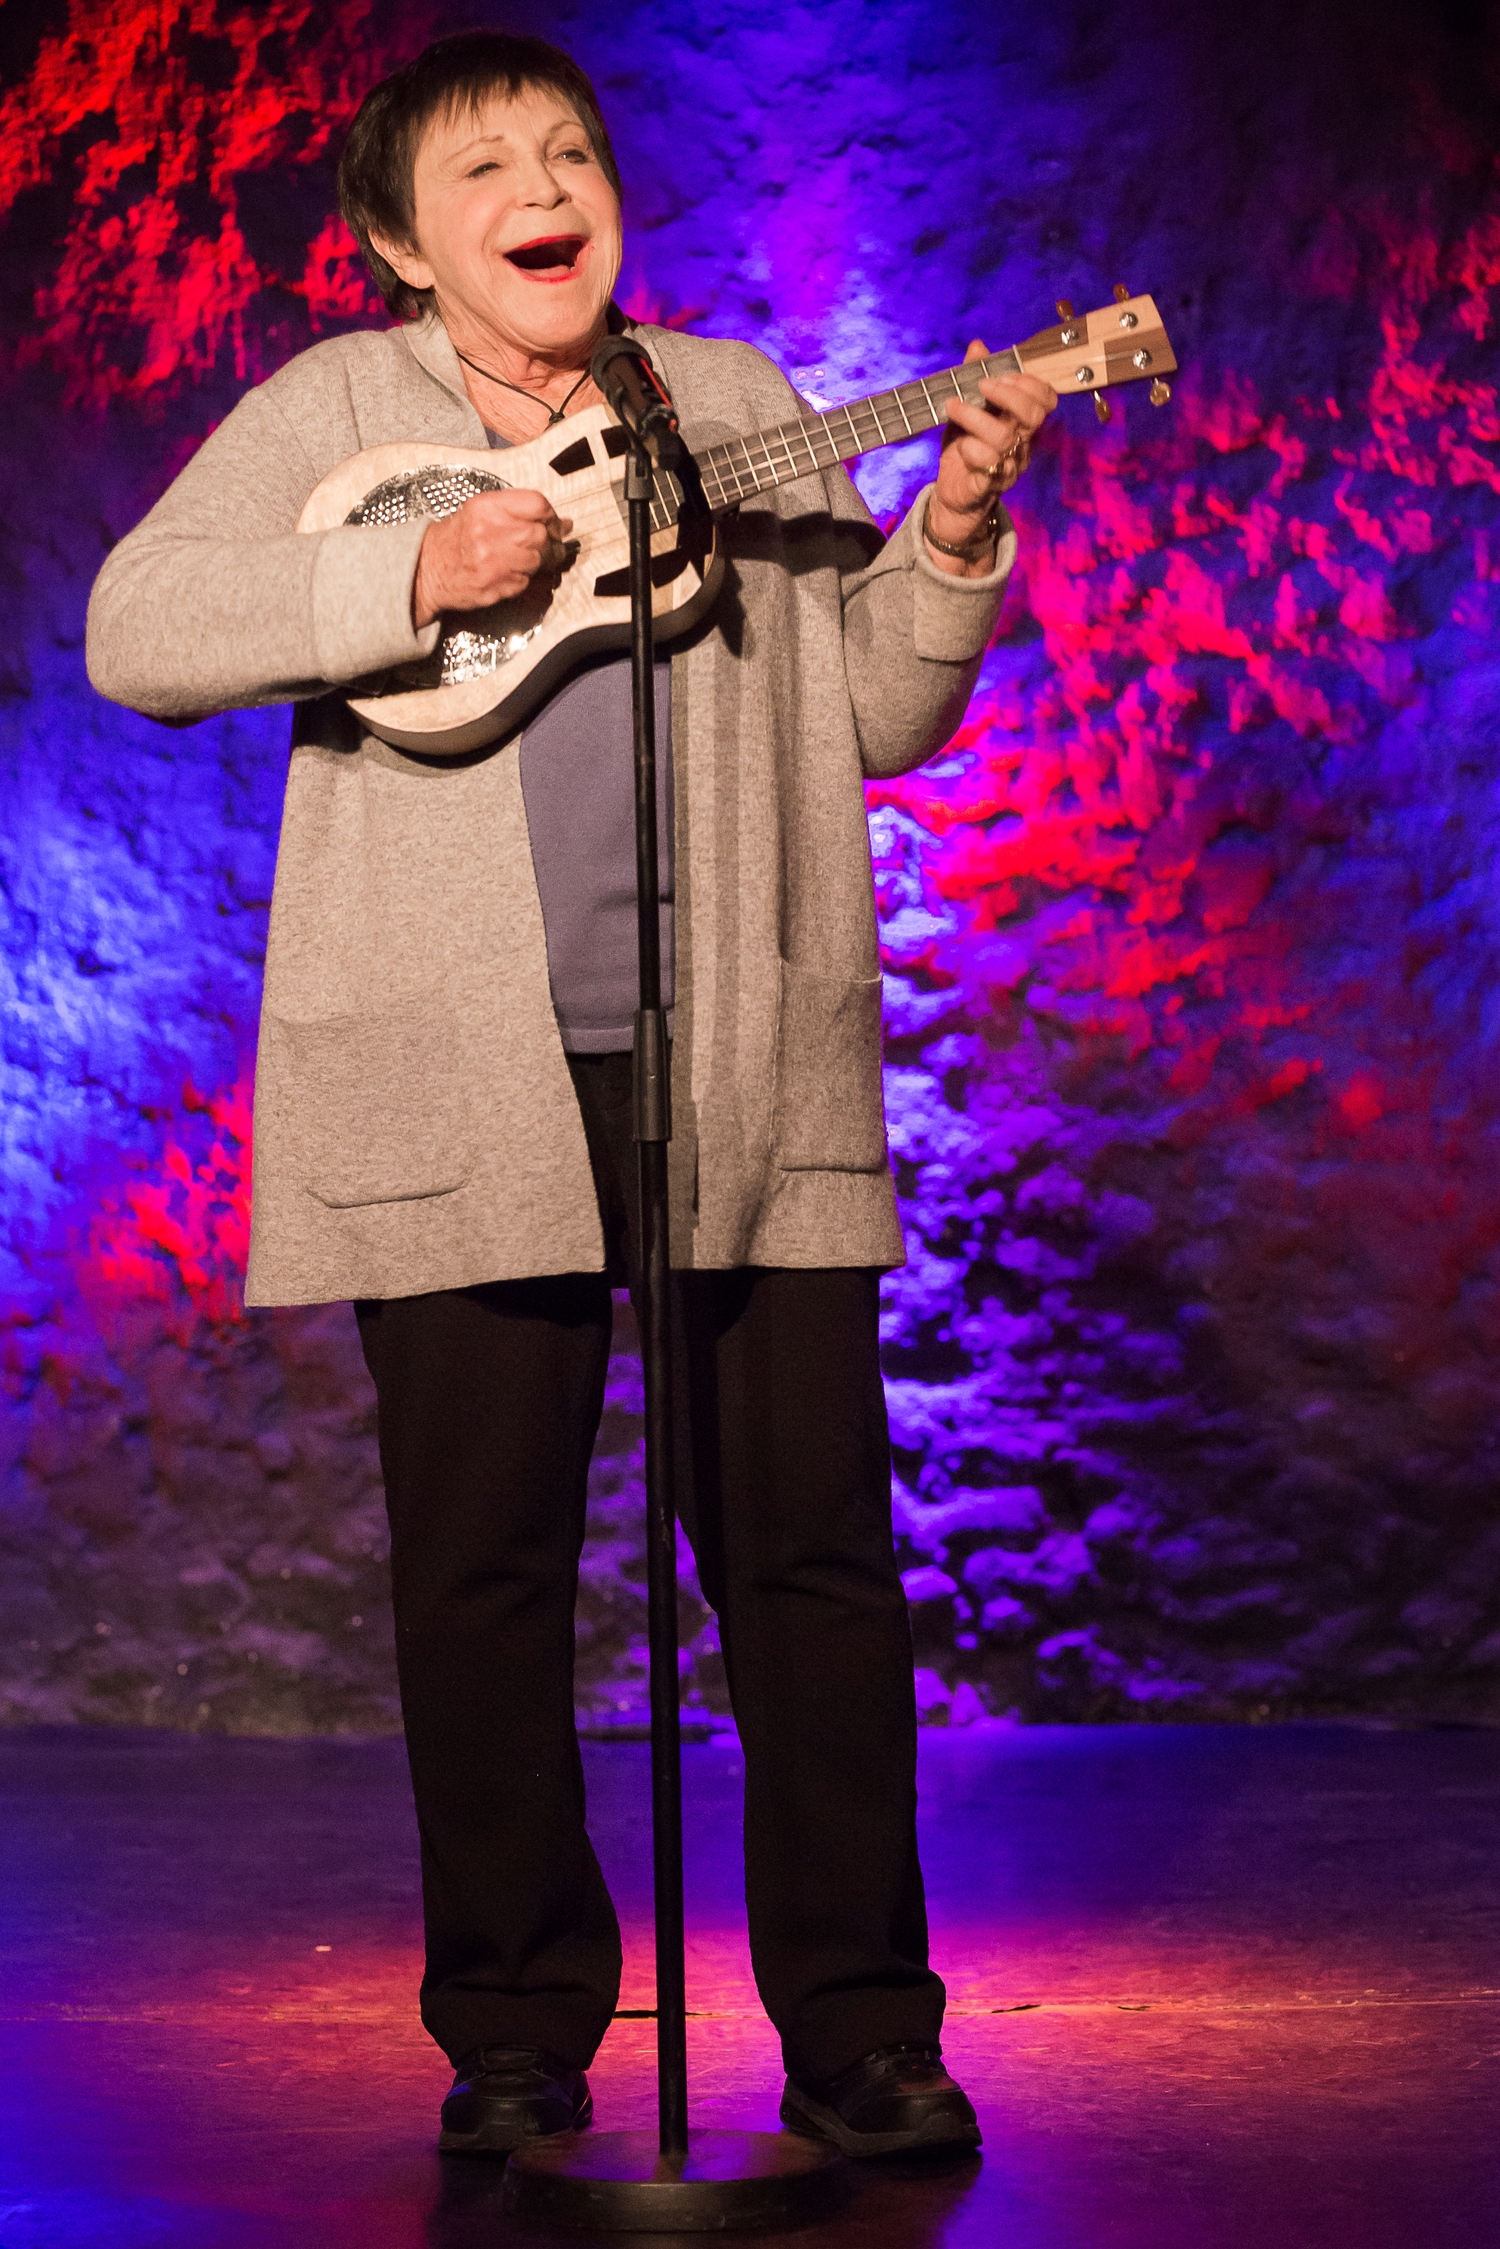 Southampton Village resident D'yan Forest, 89, is in the Guinness Book of World Records the world's oldest living comedian. She performed at the Southampton Cultural Center recently, and regularly performs stand-up at the Gotham Comedy Club in New York City. CHRISTINE COQUILLEAU